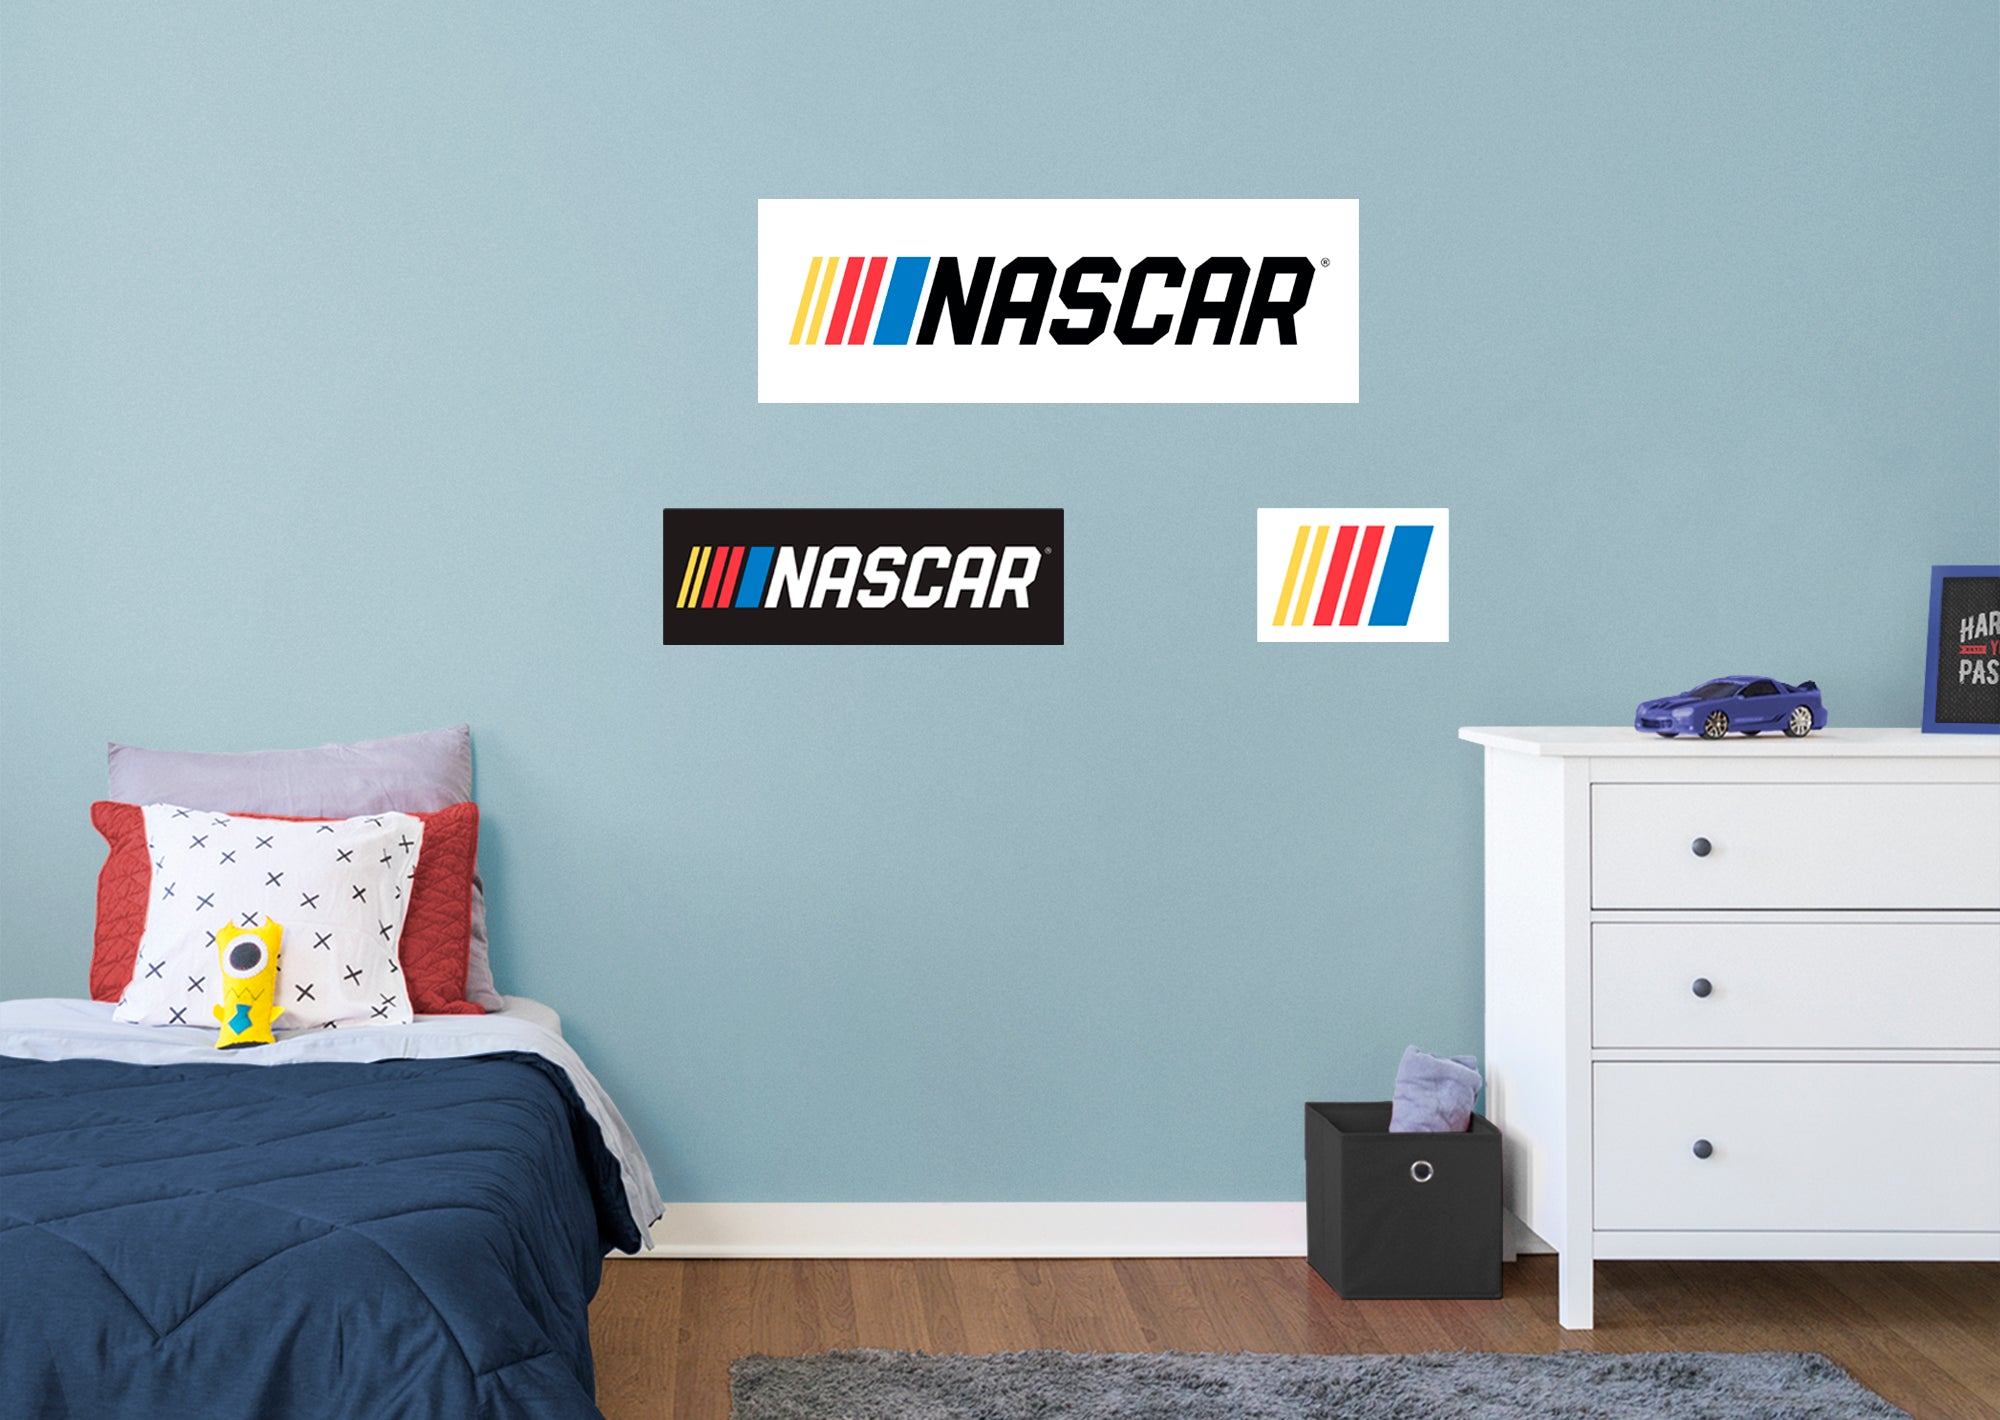 2021 Bar Logo - Officially Licensed NASCAR Removable Wall Decal Giant Logo + 2 Decals (51"W x 17"H) by Fathead | Vinyl